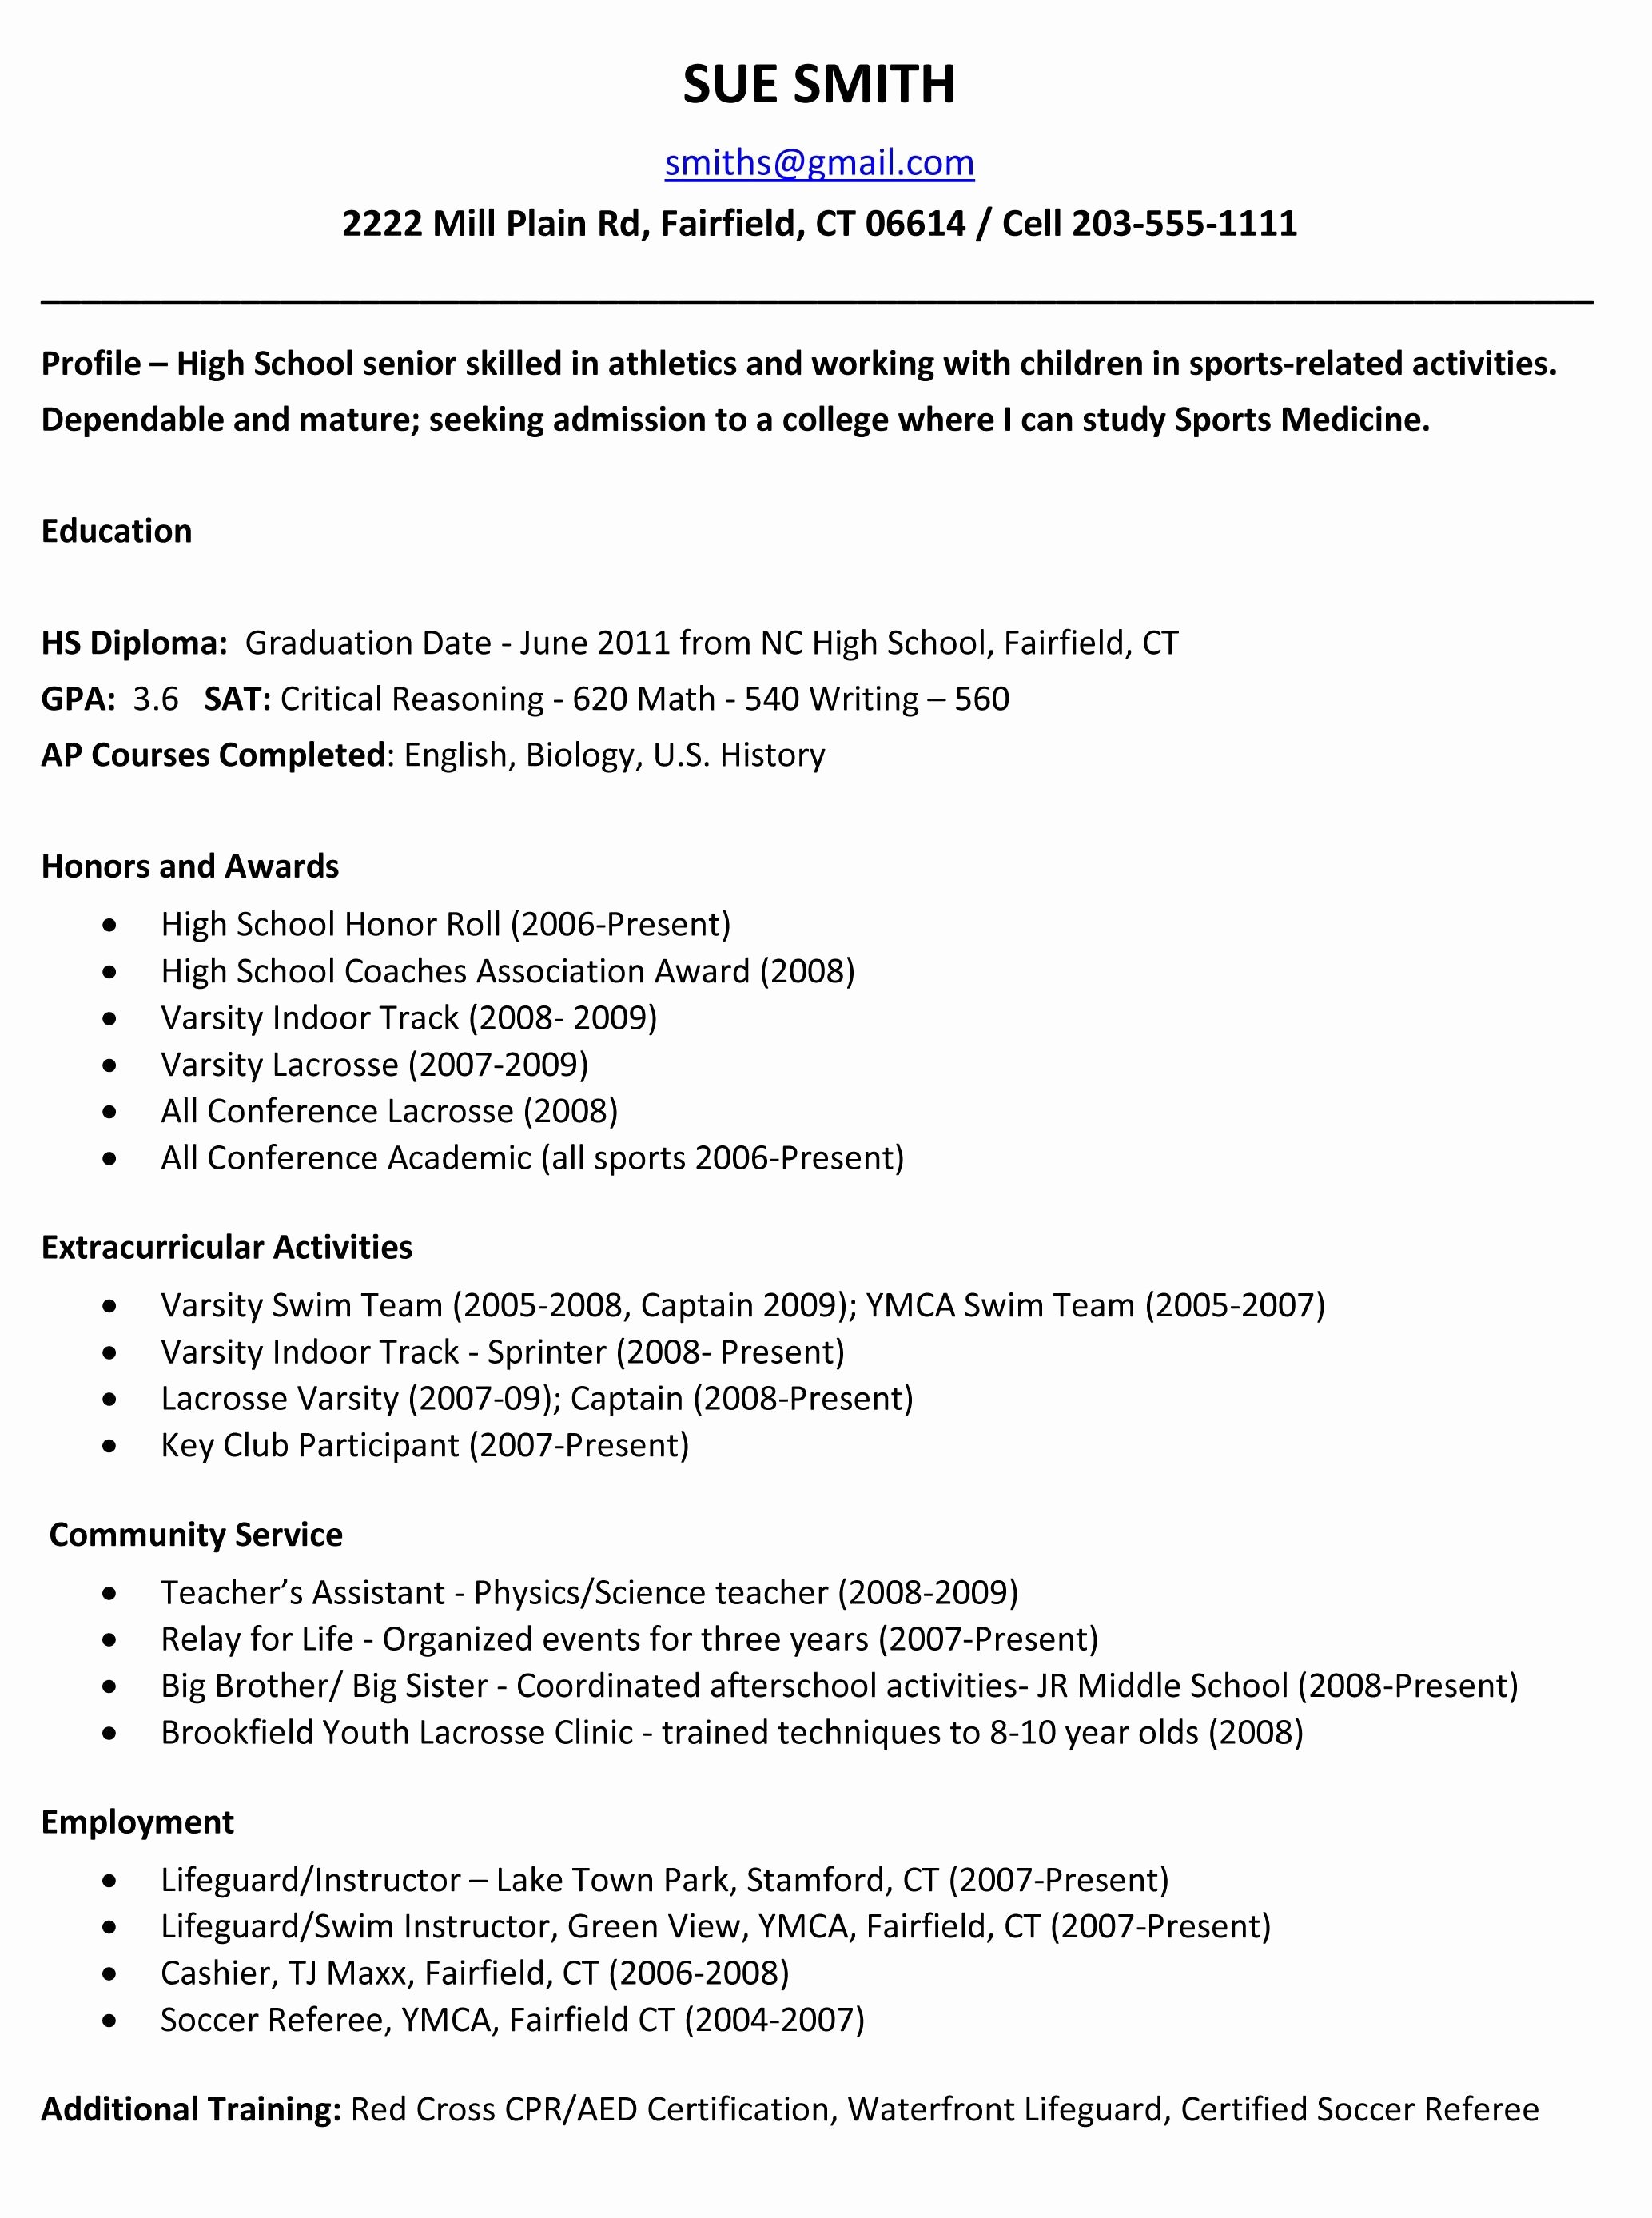 Example Resume for High School Students for College